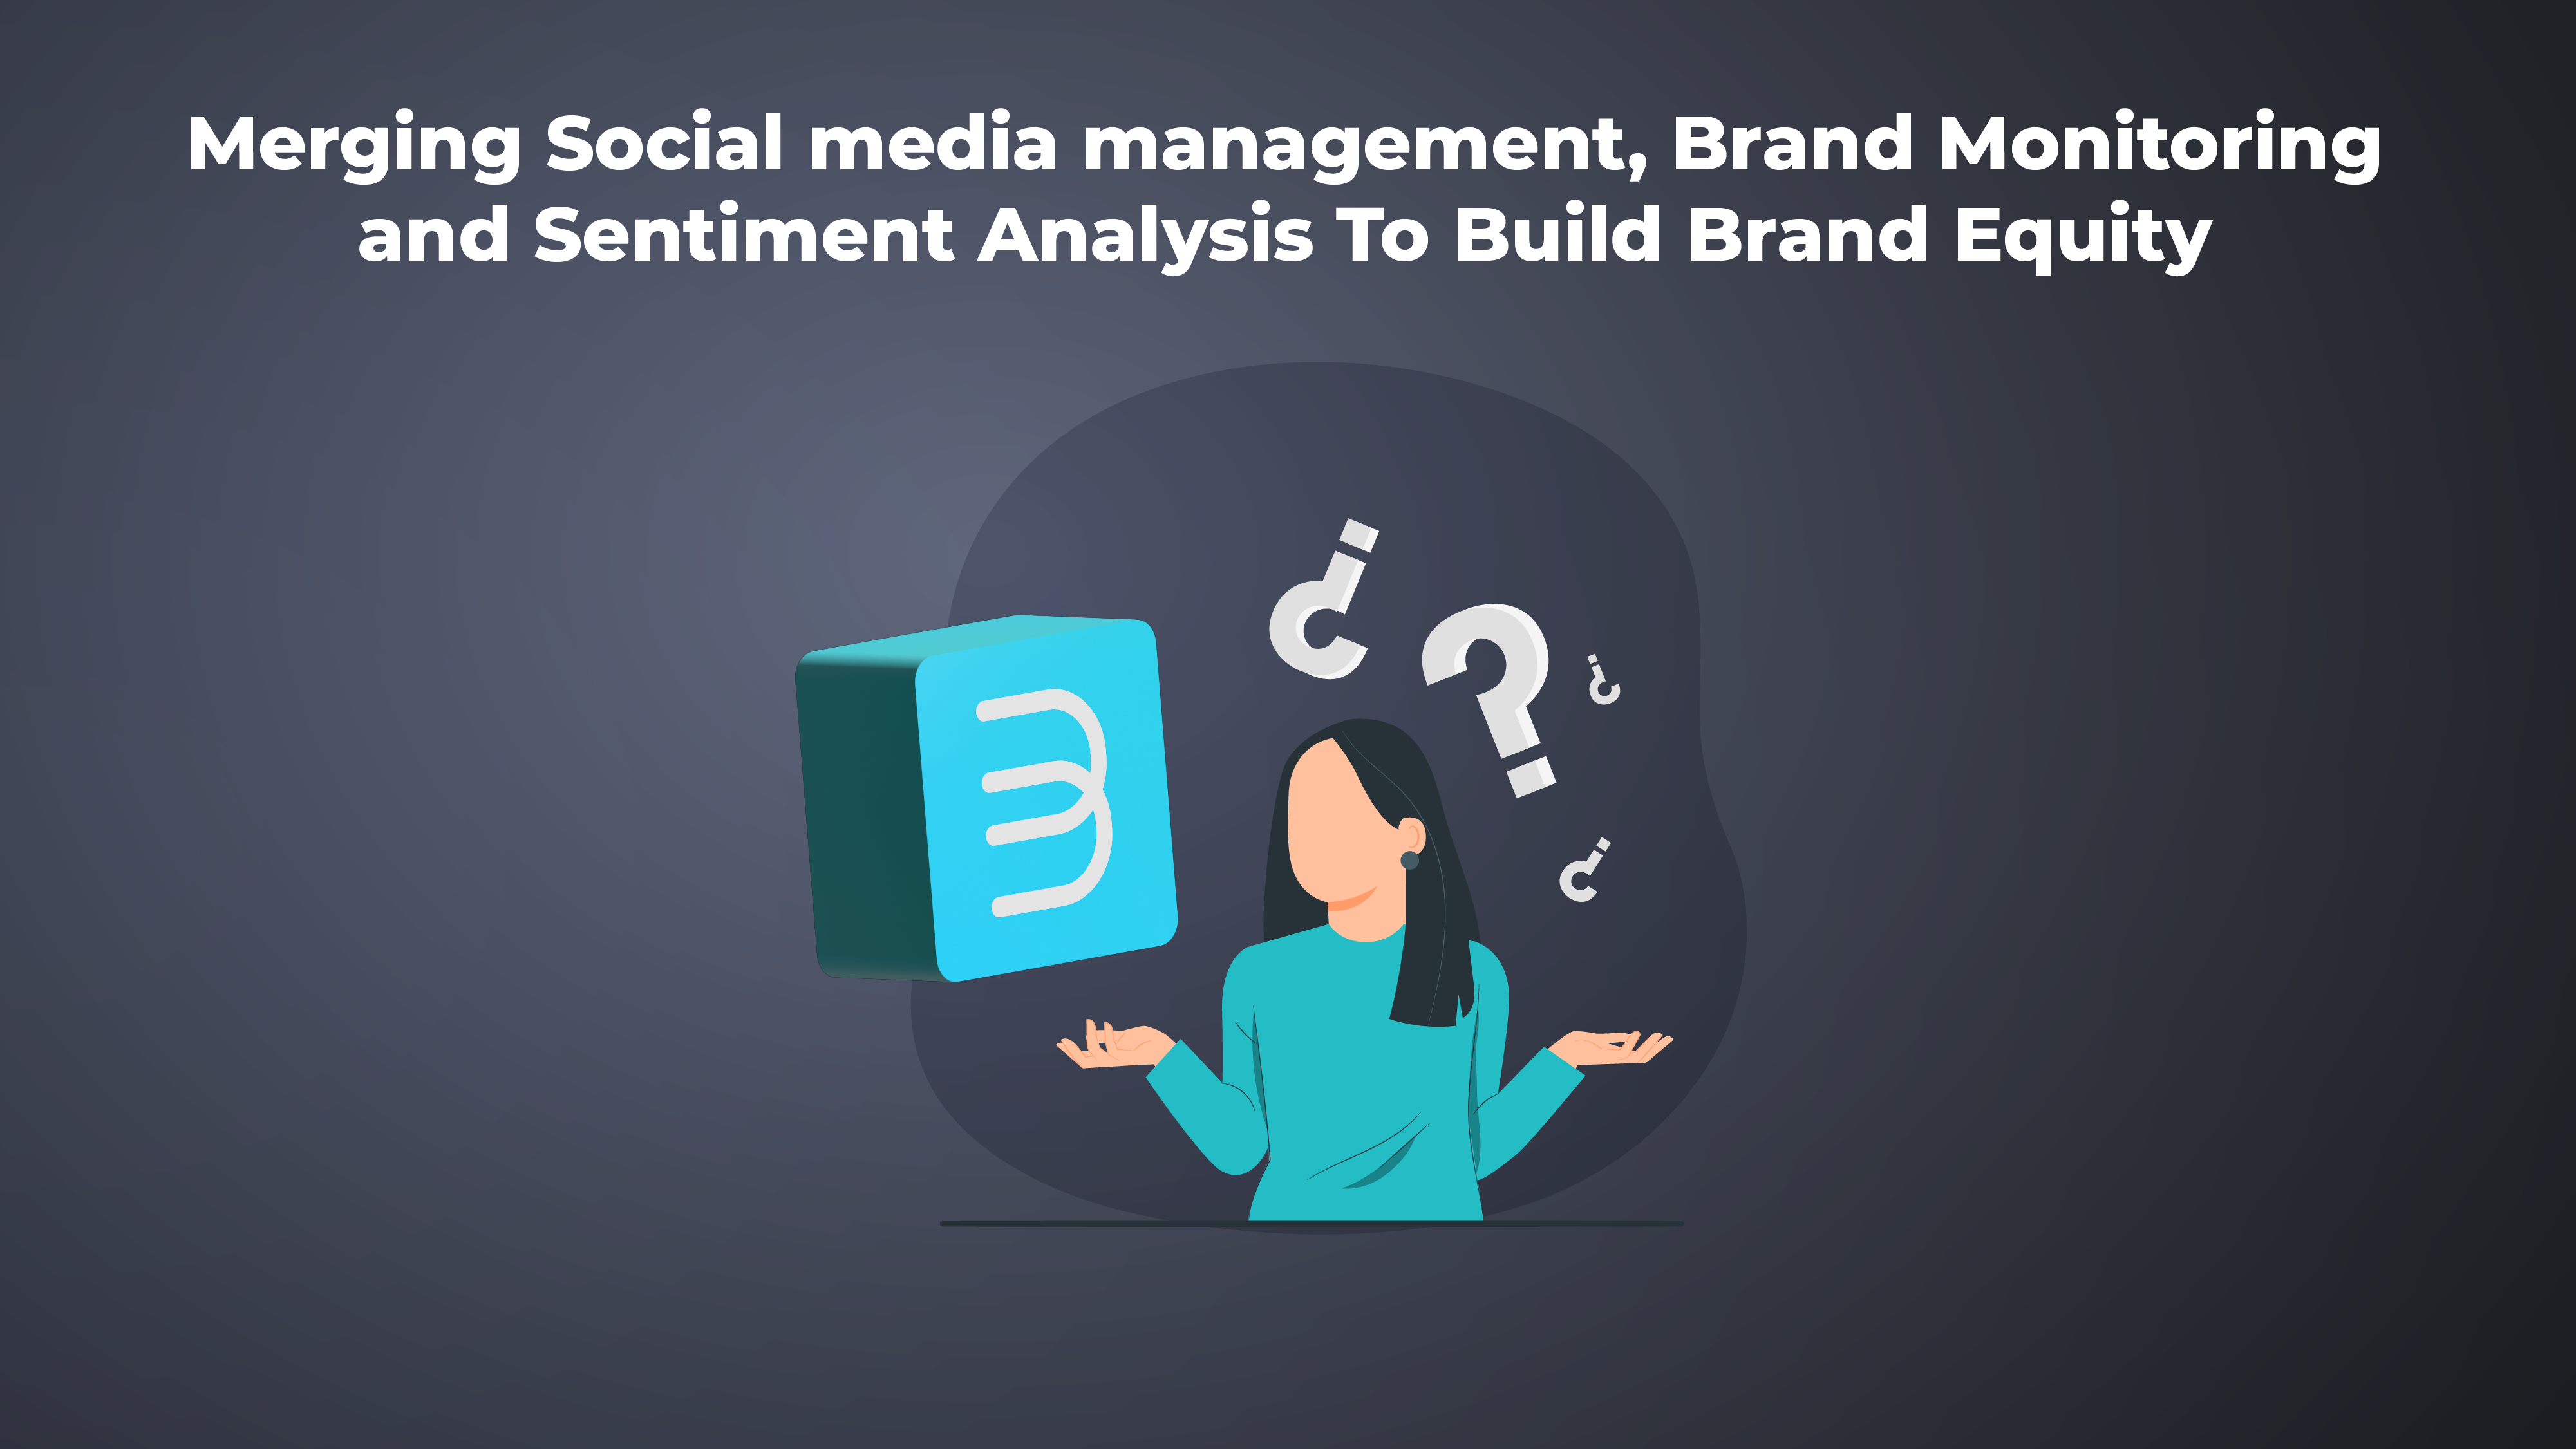 11-Merging Social media management, Brand Monitoring and Sentiment Analysis To Build Brand Equity - BrandEquity